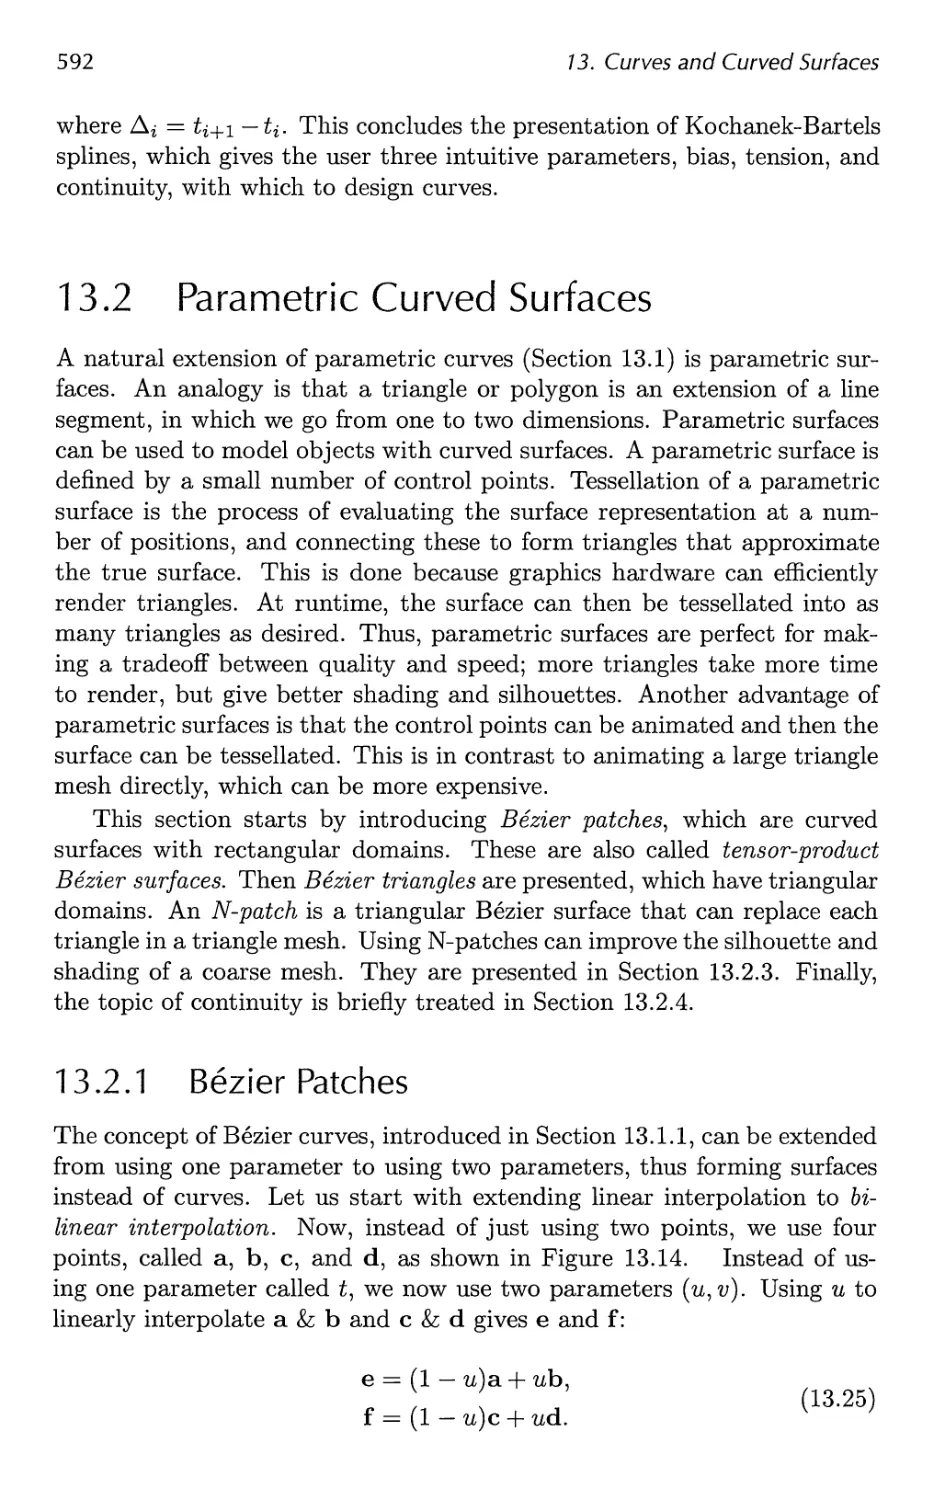 13.2 Parametric Curved Surfaces